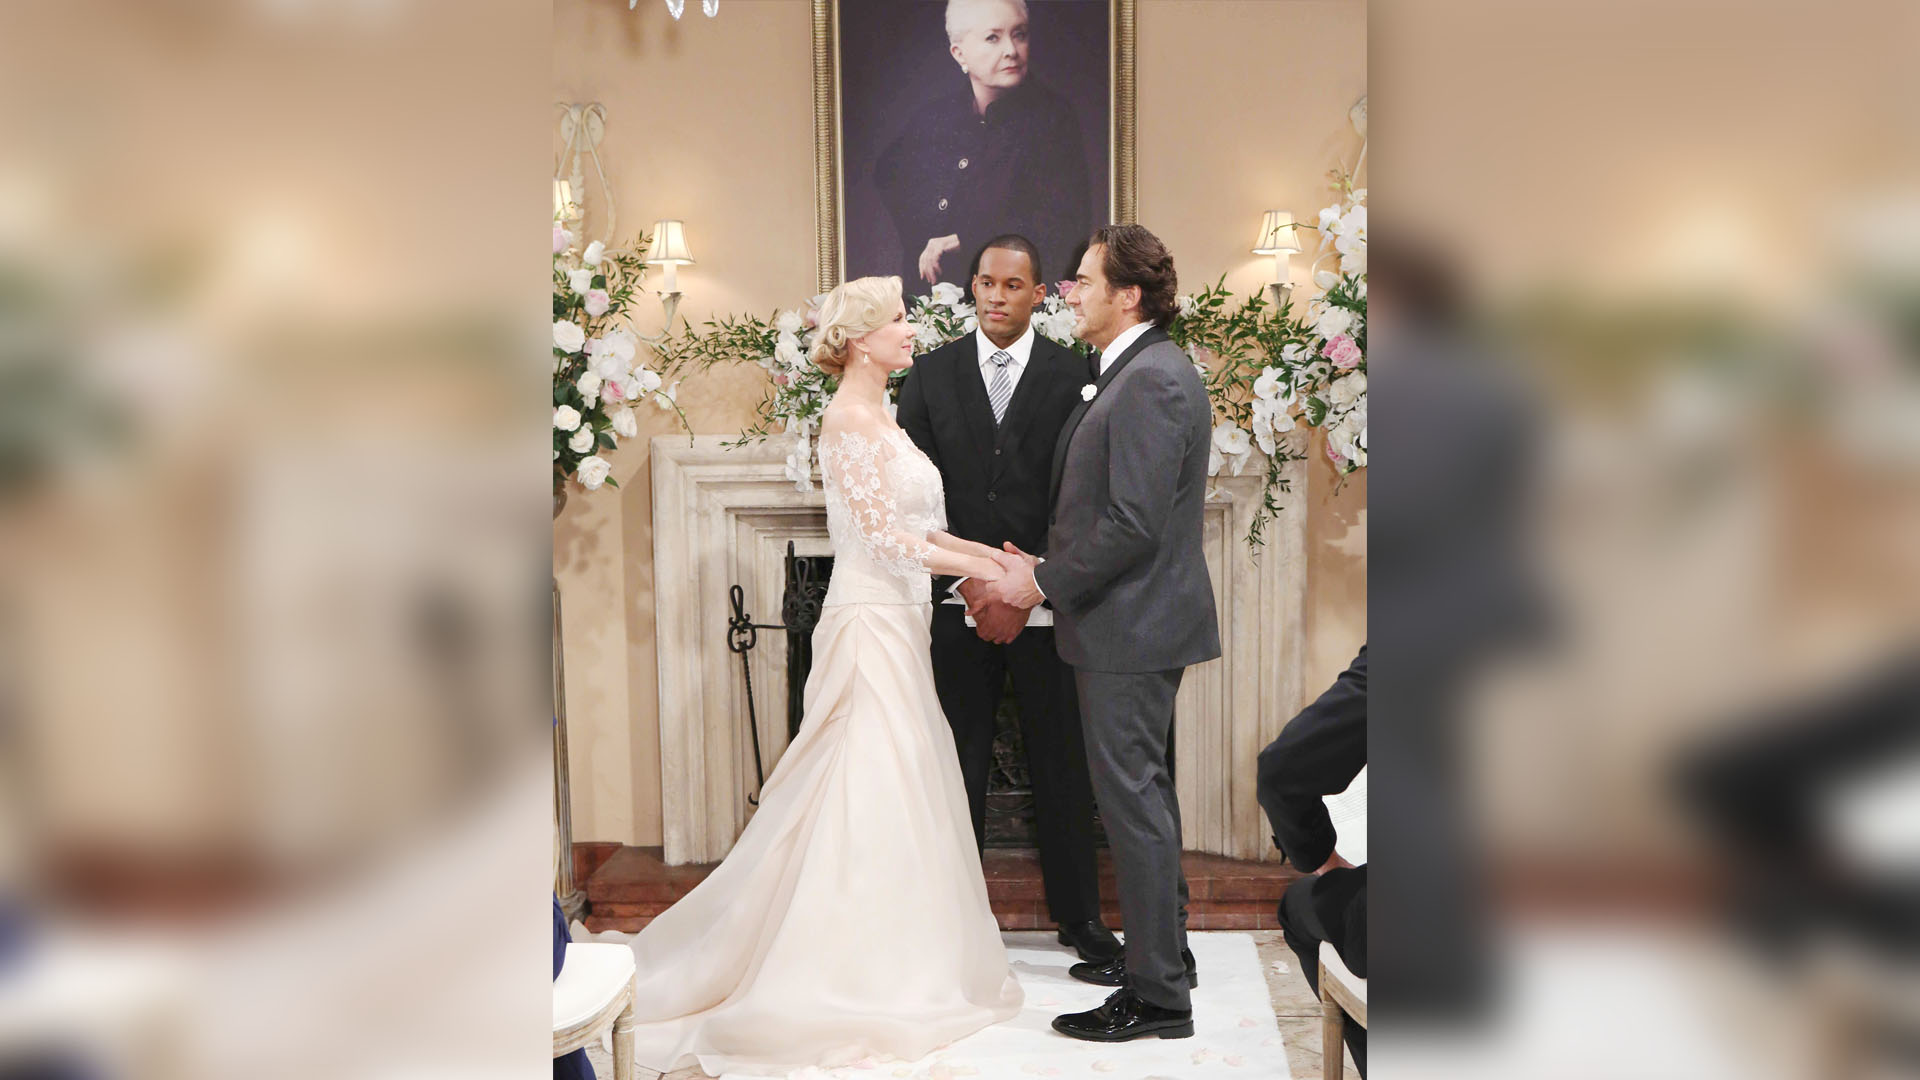 Surrounded by family and friends, and with a familiar face above the fireplace, Brooke and Ridge's wedding begins.